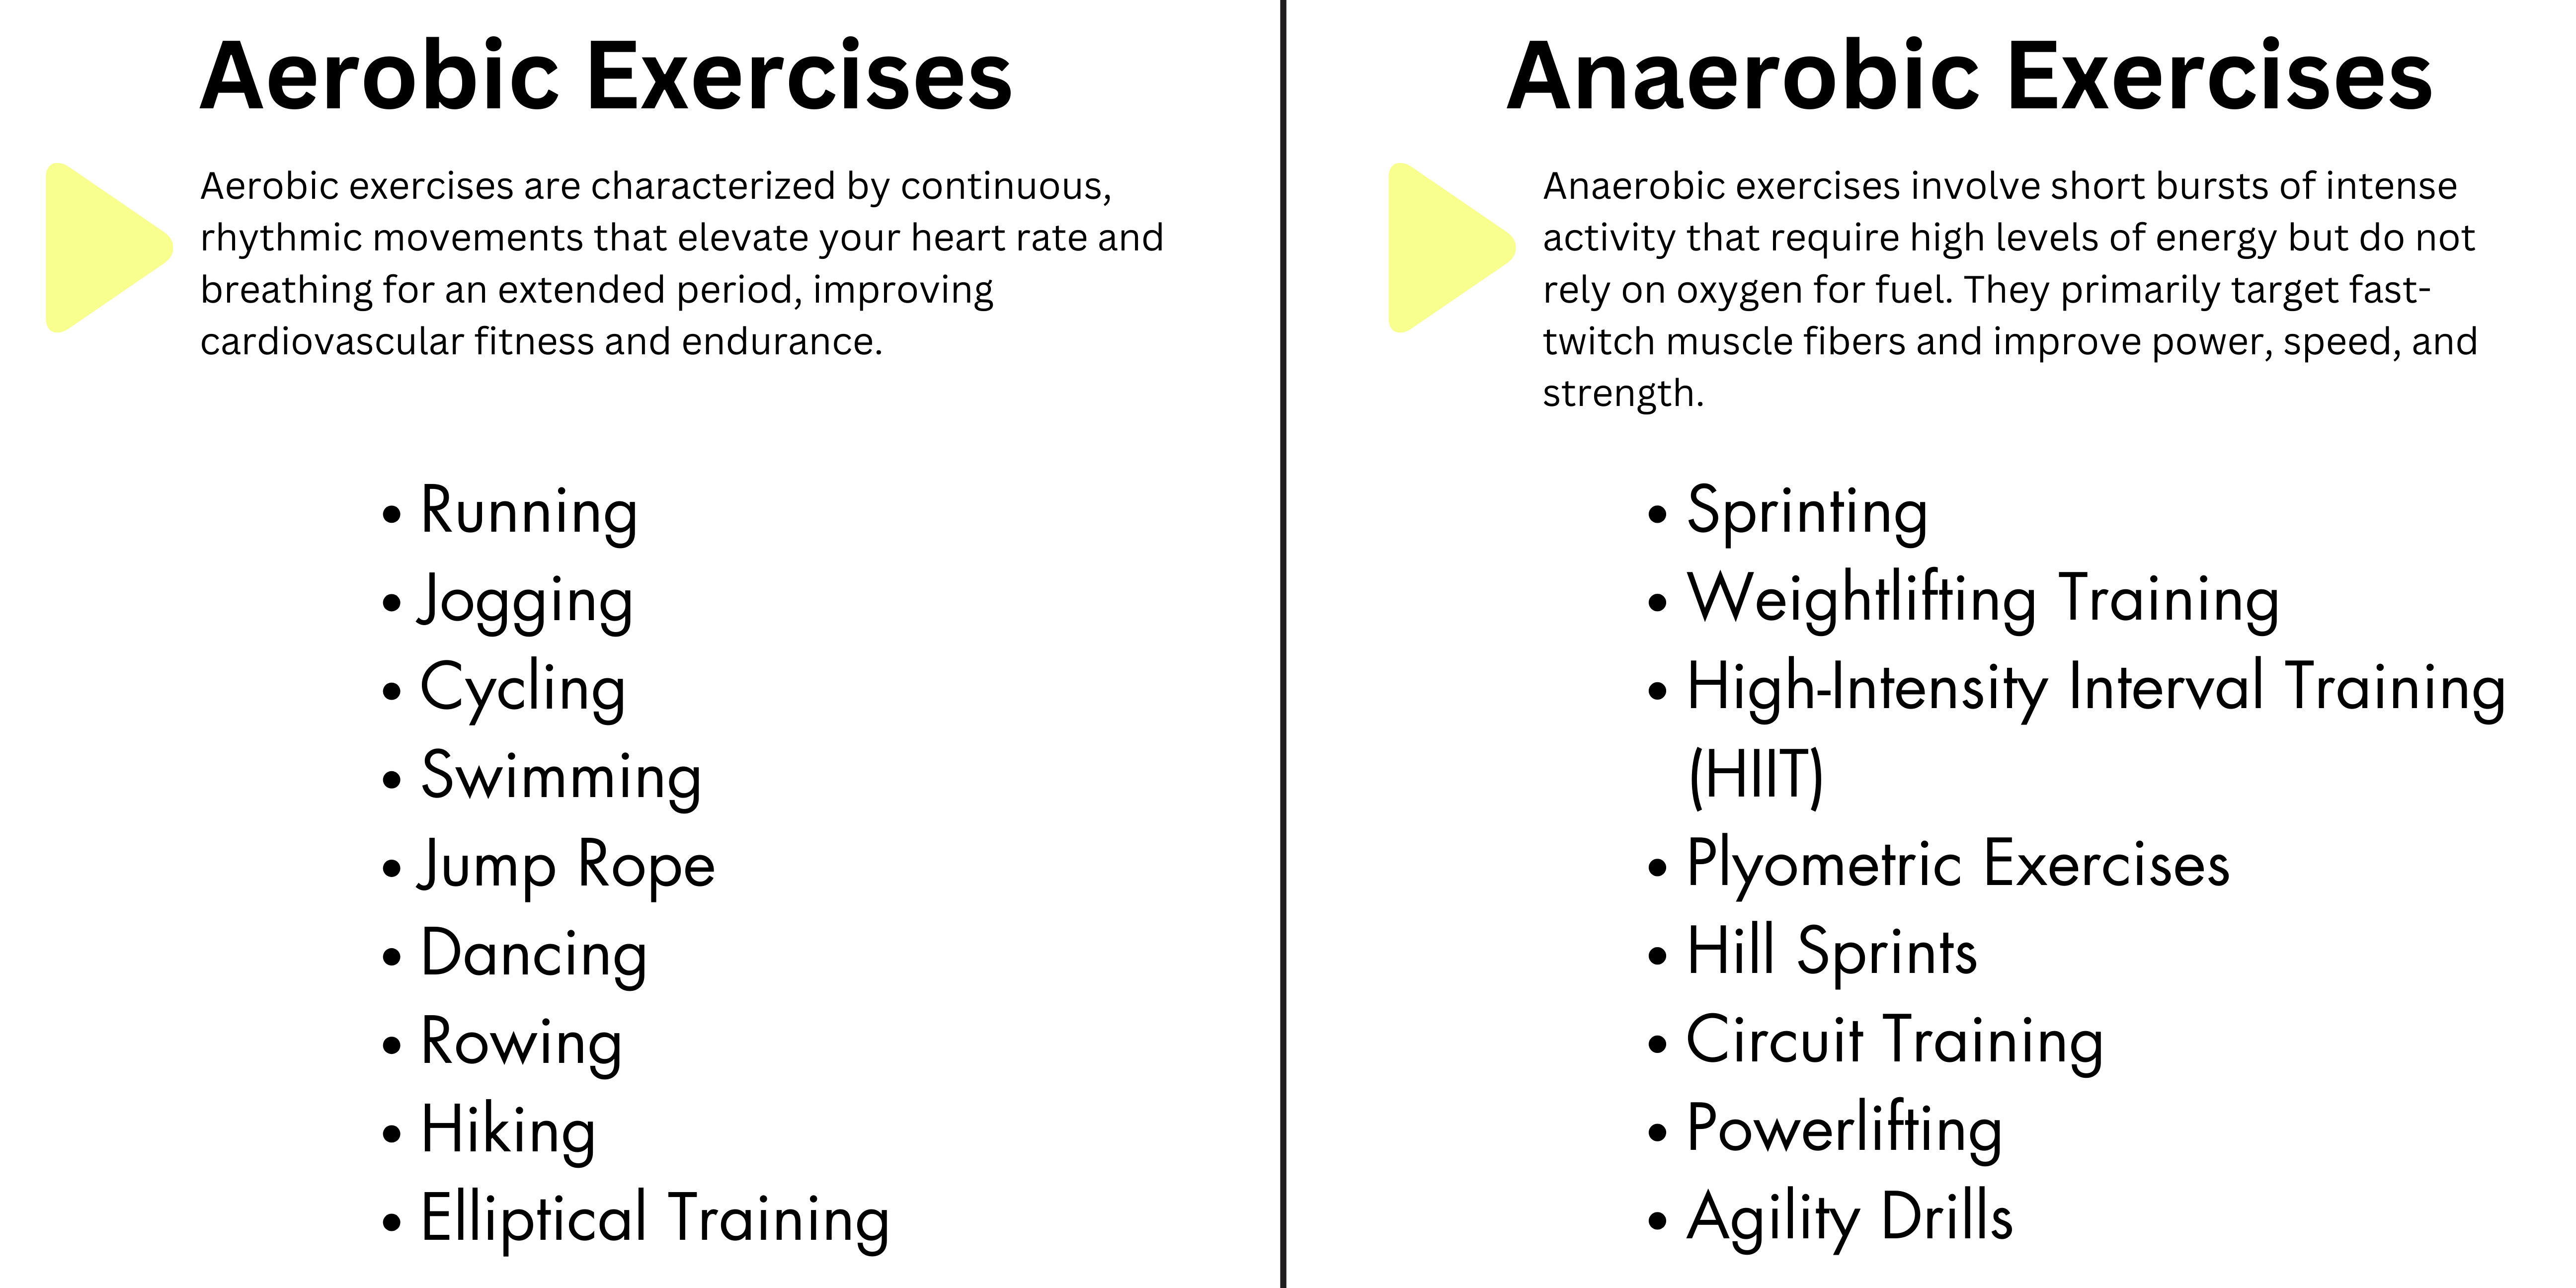 What muscles do treadmills work? About aerobic and anaerobic workouts and treadmill exercises.